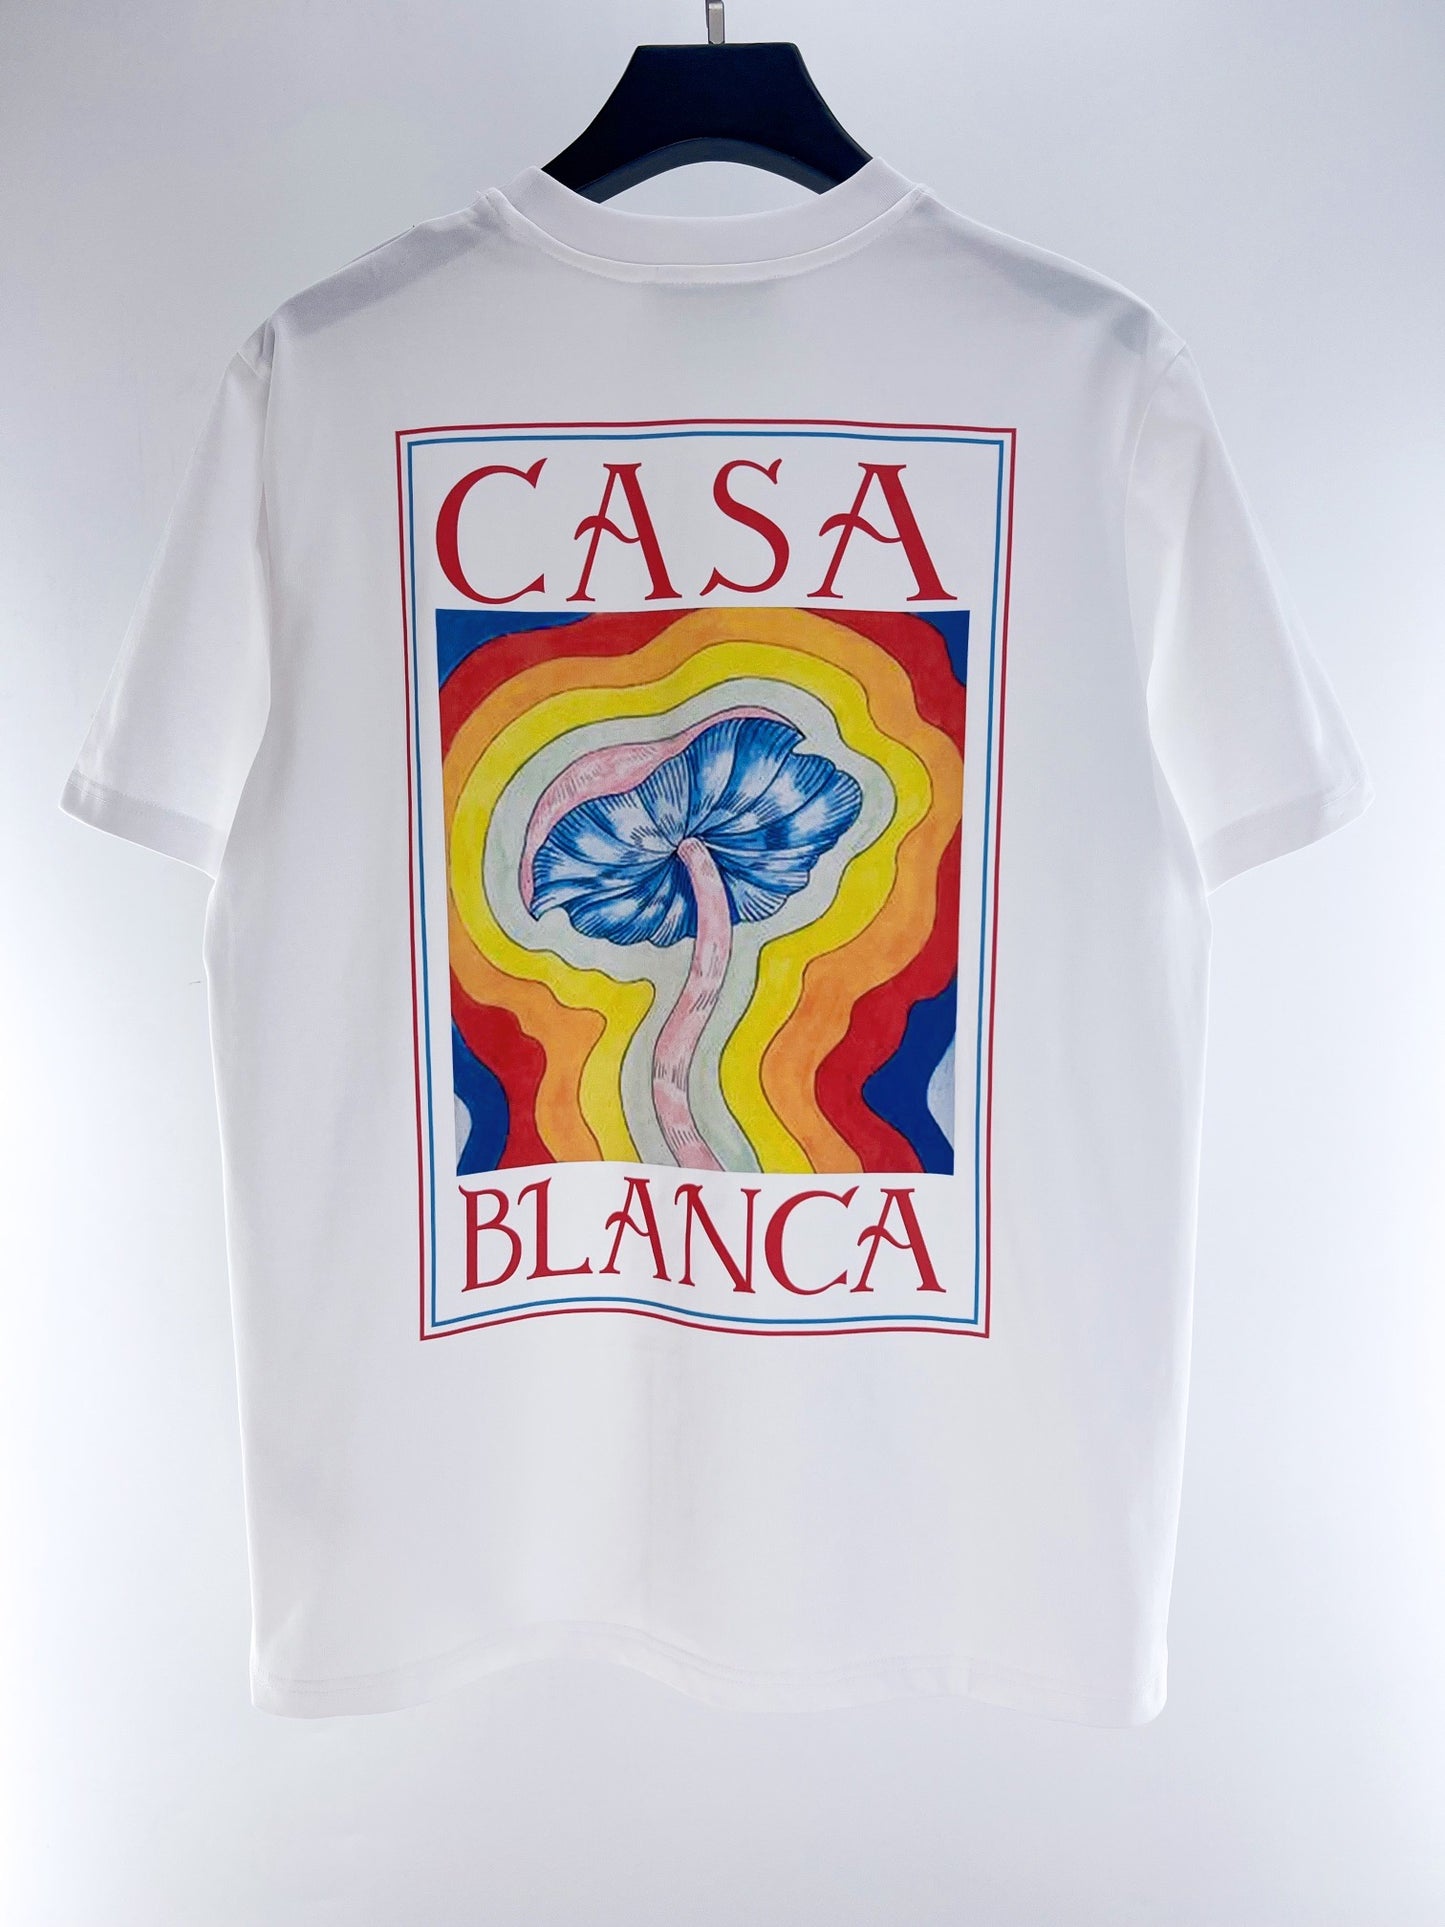 All C A S A T-SHIRTS